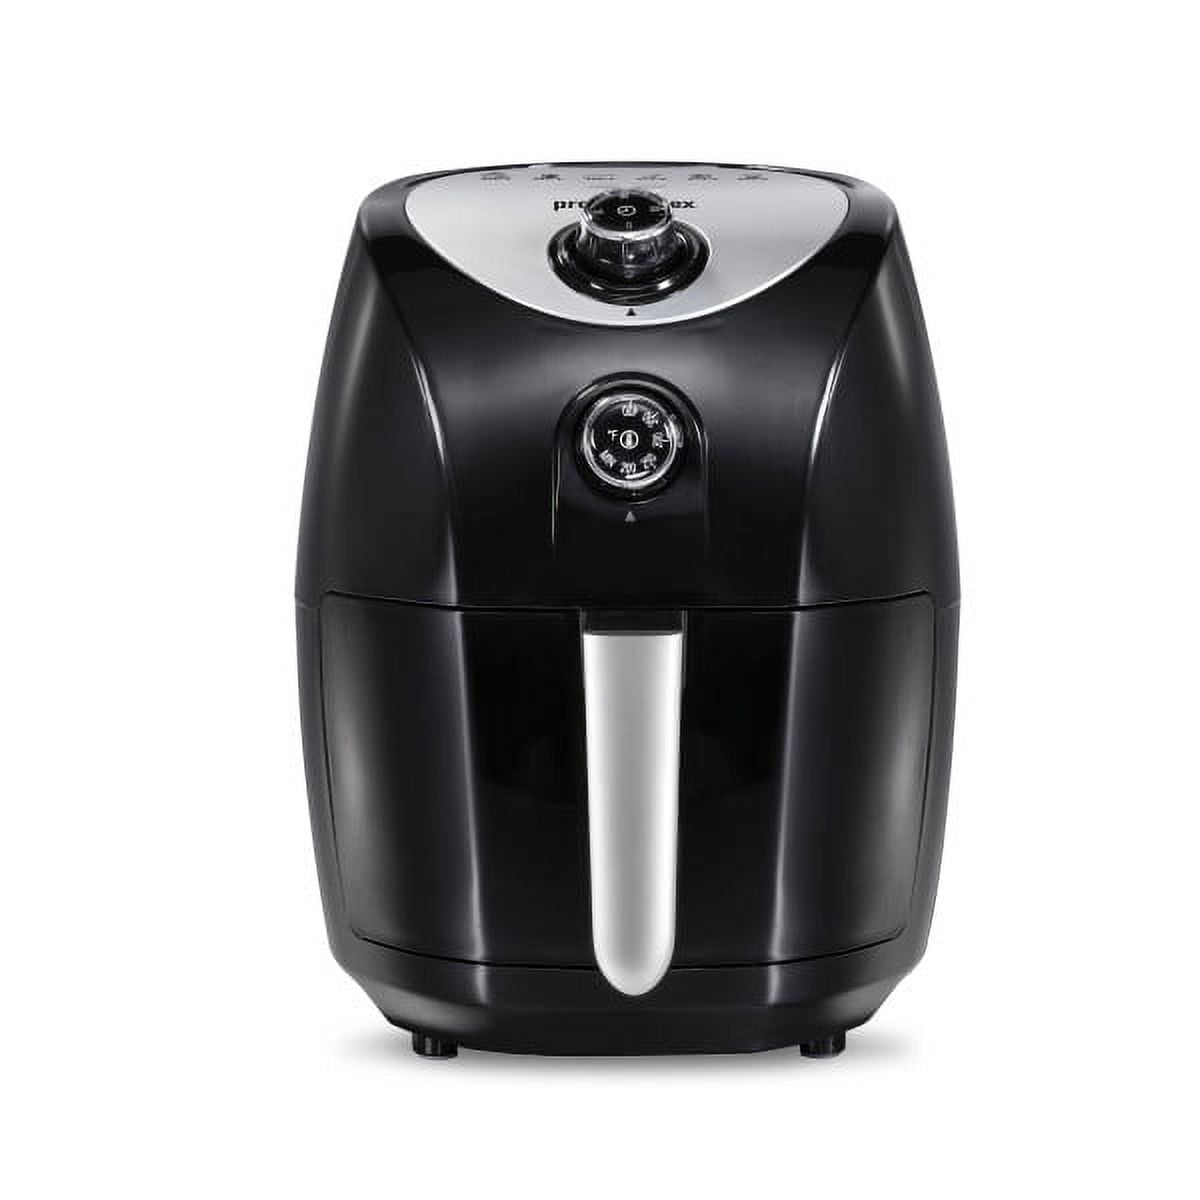 8L Proctor Silex Fryer With Touch Screen LED 1400W Electric Air Fryzer  Without Oil Ideal For Cooking T220819 From Wangcai06, $116.21